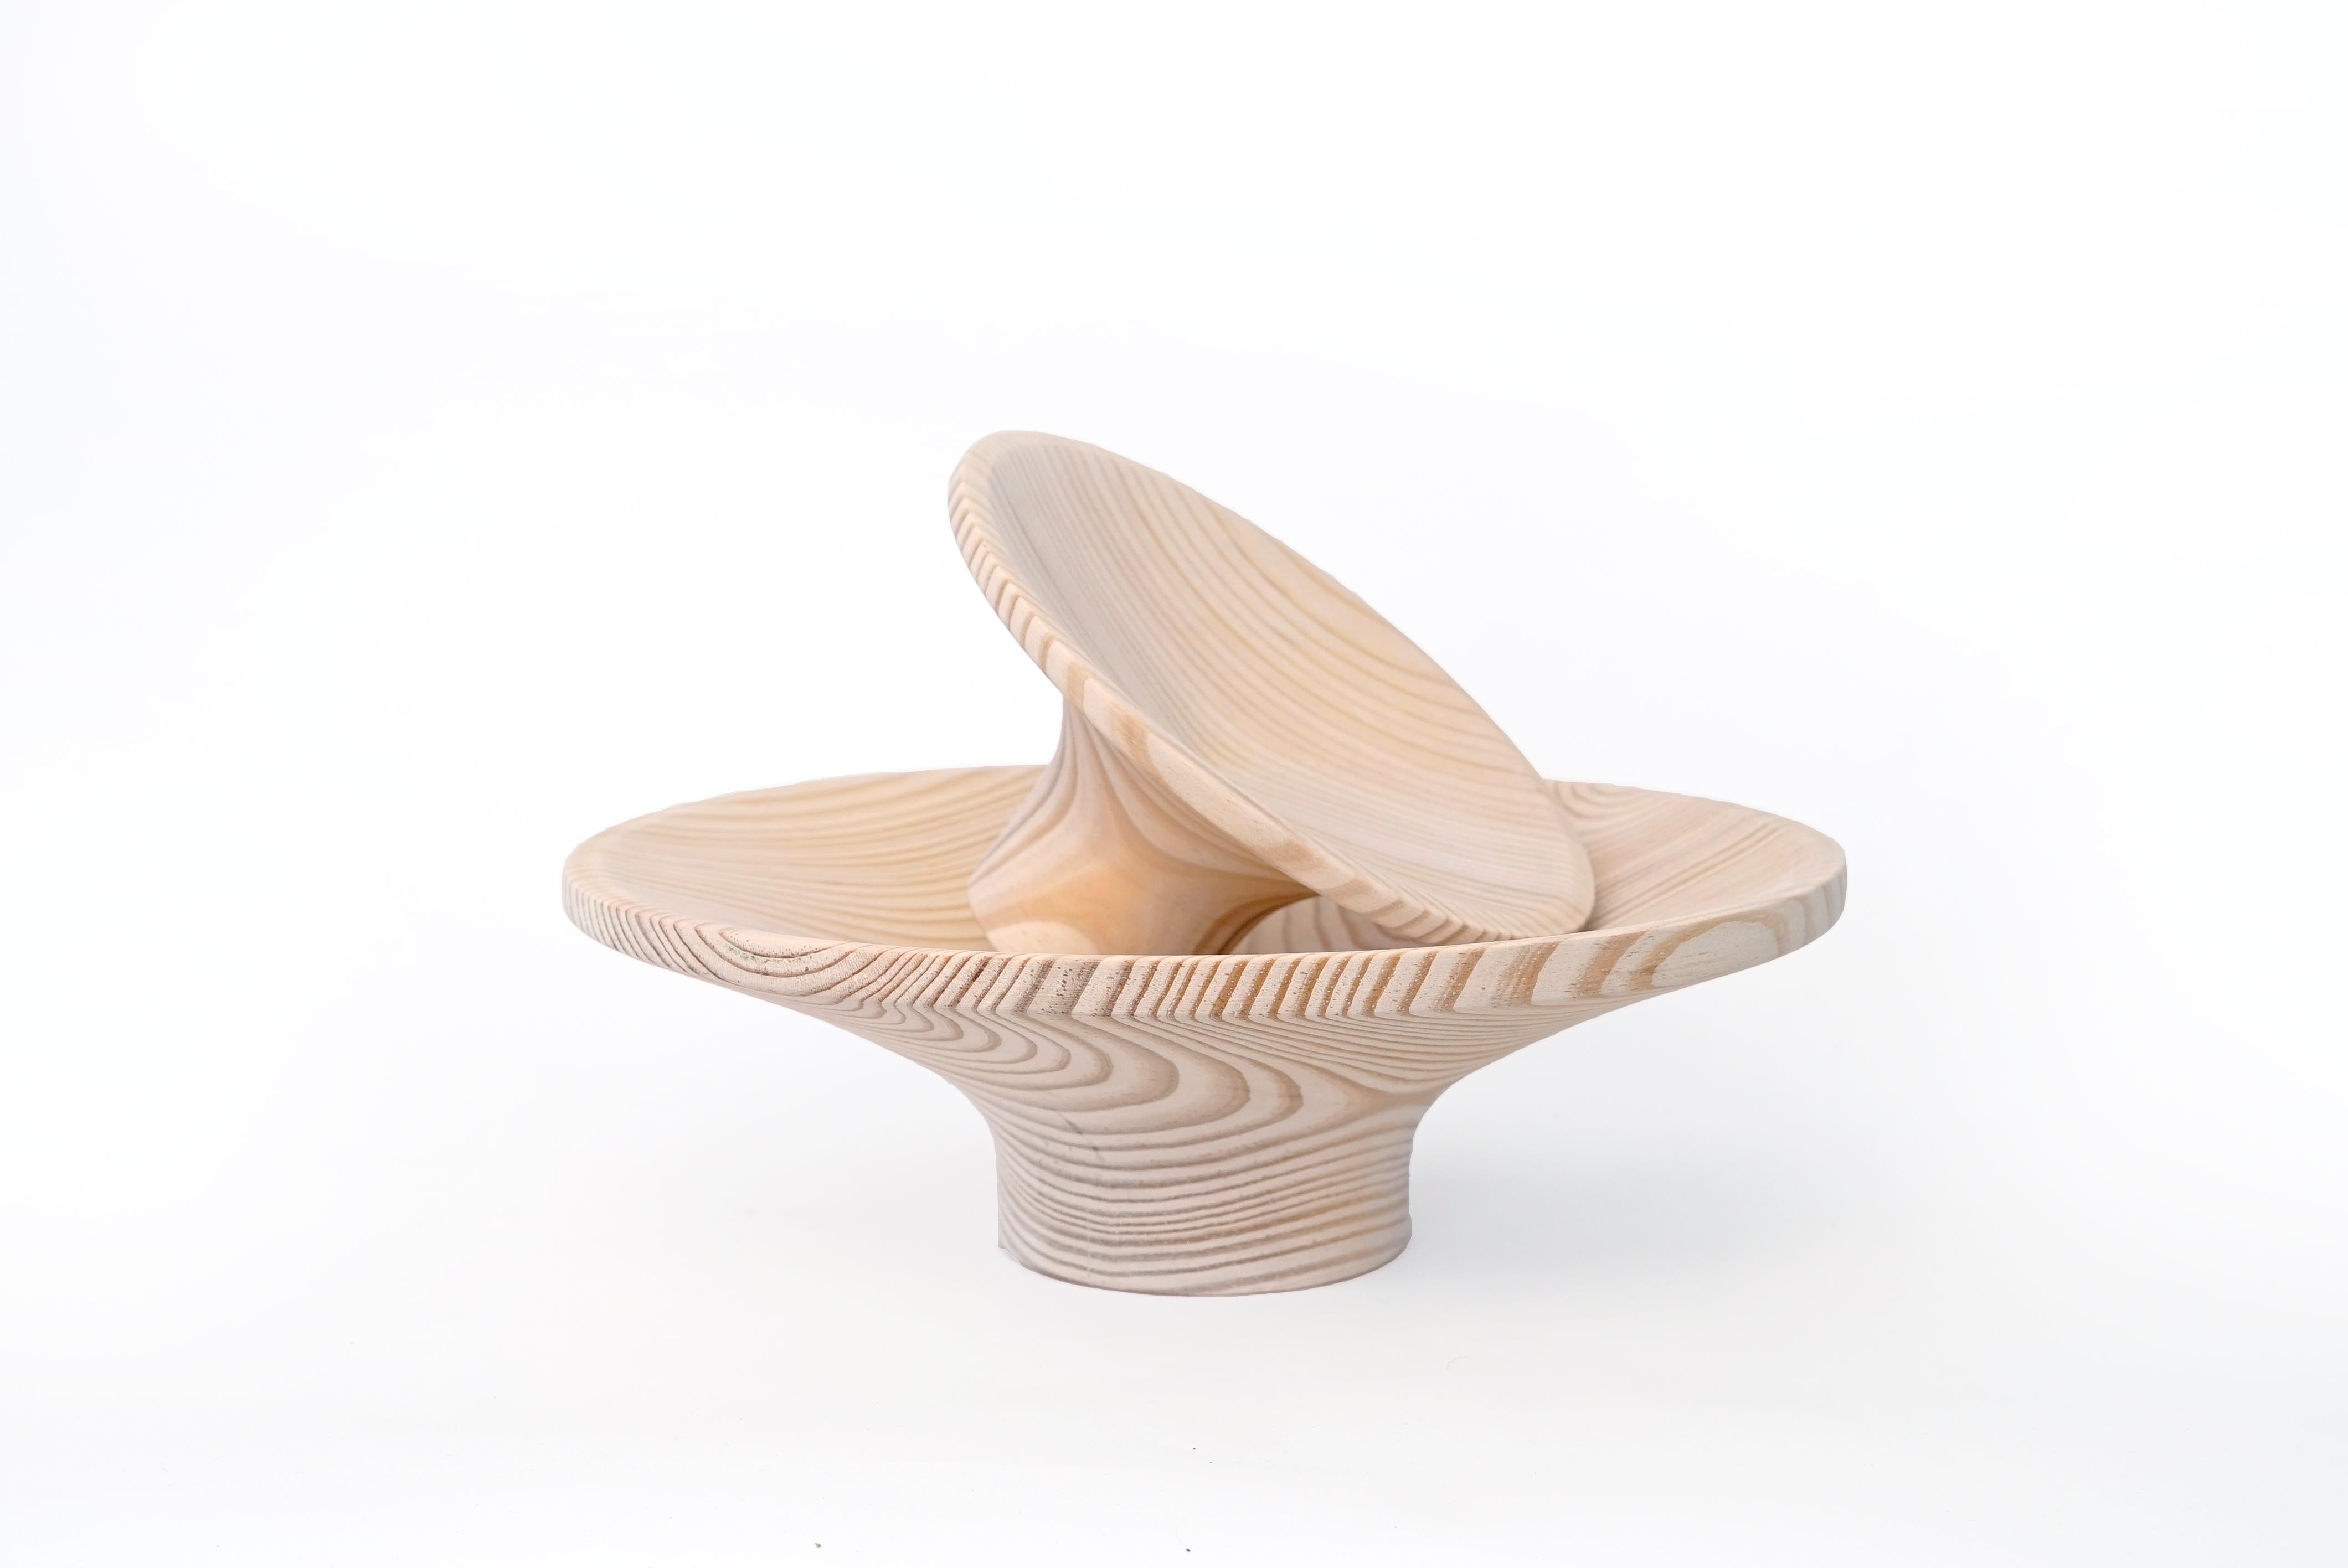 Portuguese Pyrolysis - Smooth Pine Wood Fruit Bowl by Samuel Reis Handmade in Portugal For Sale